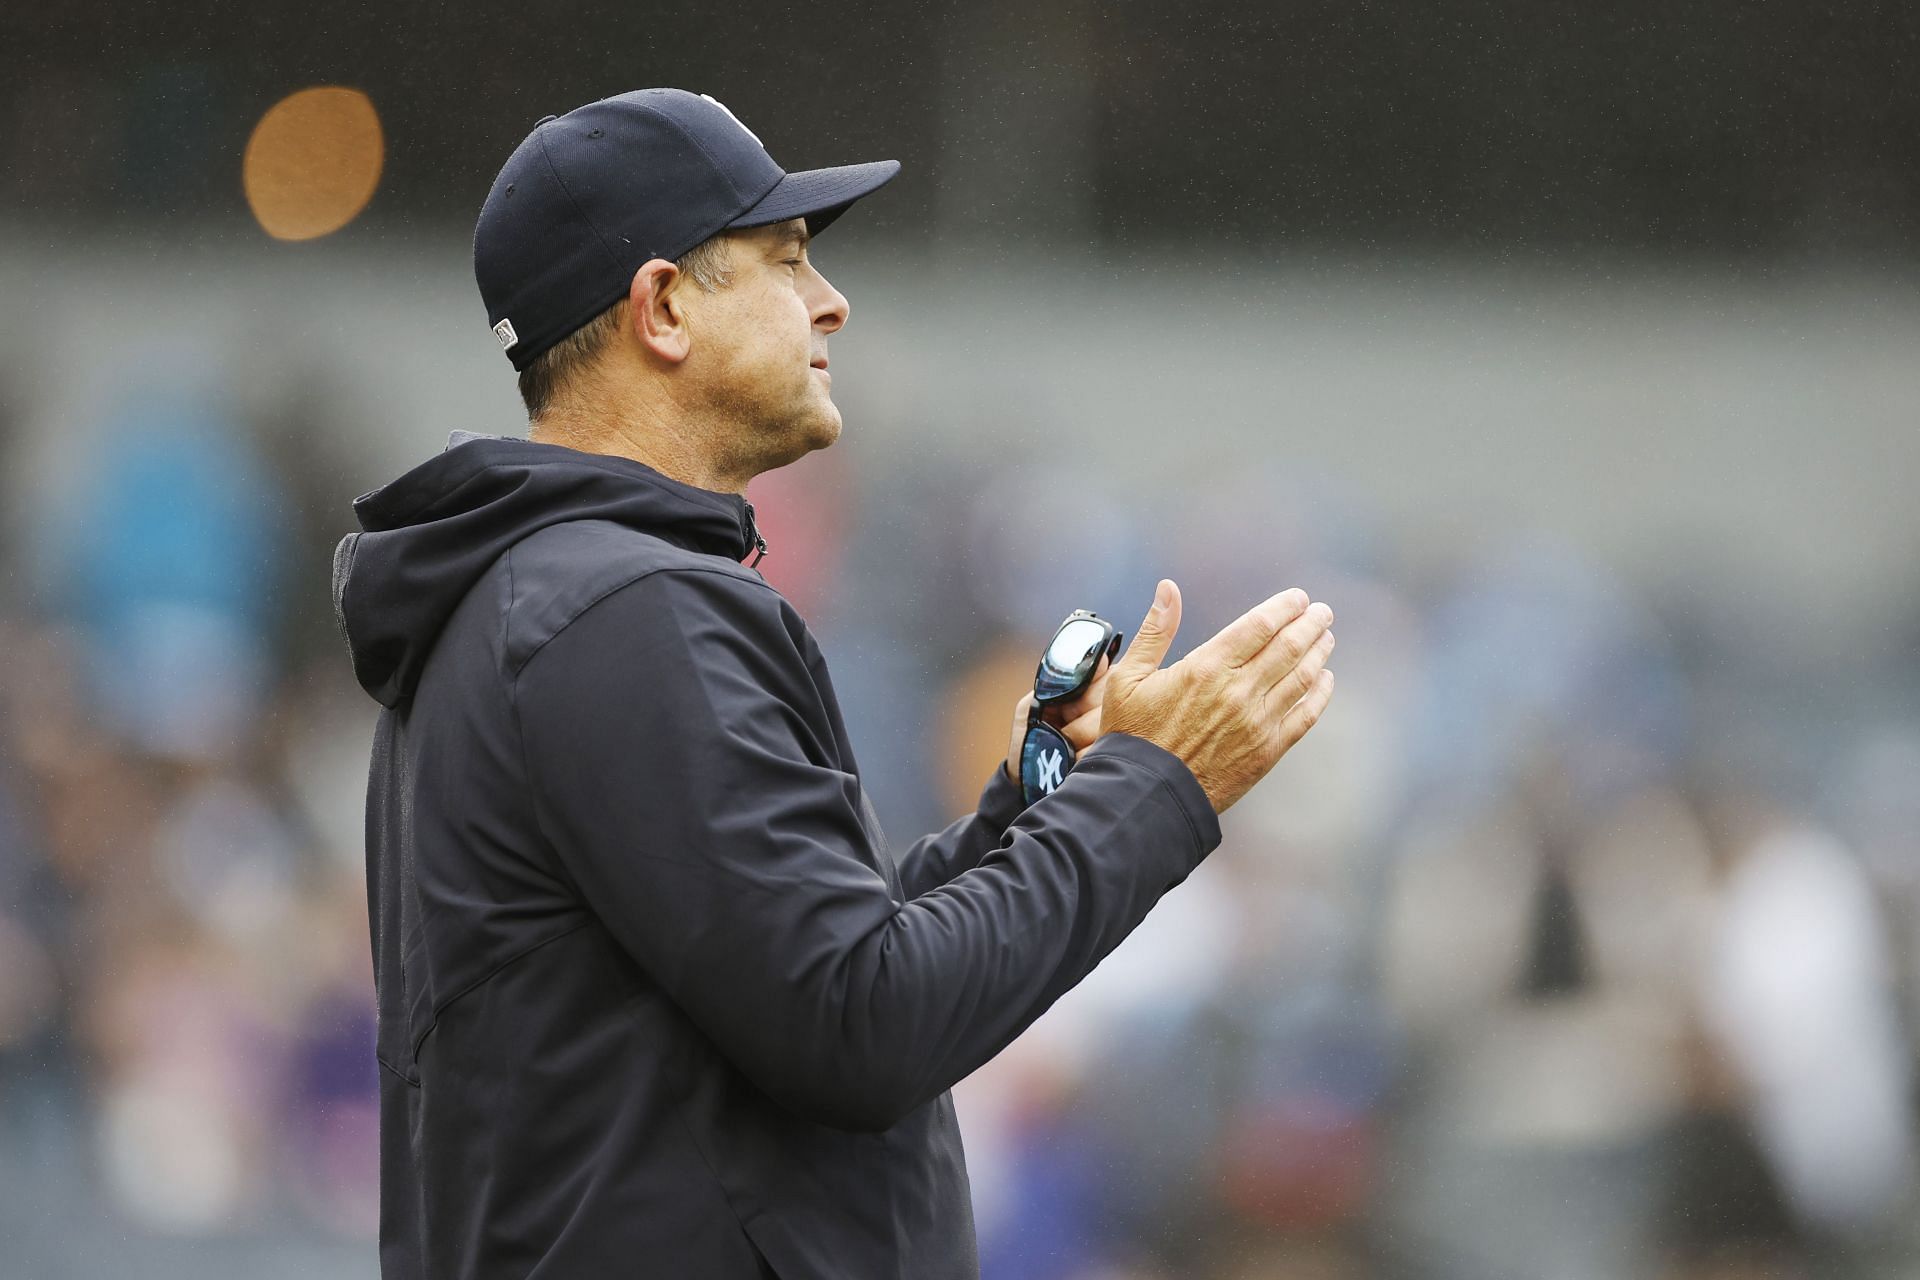 Yankees Manager Aaron Boone Explains Theatrics After Ejection